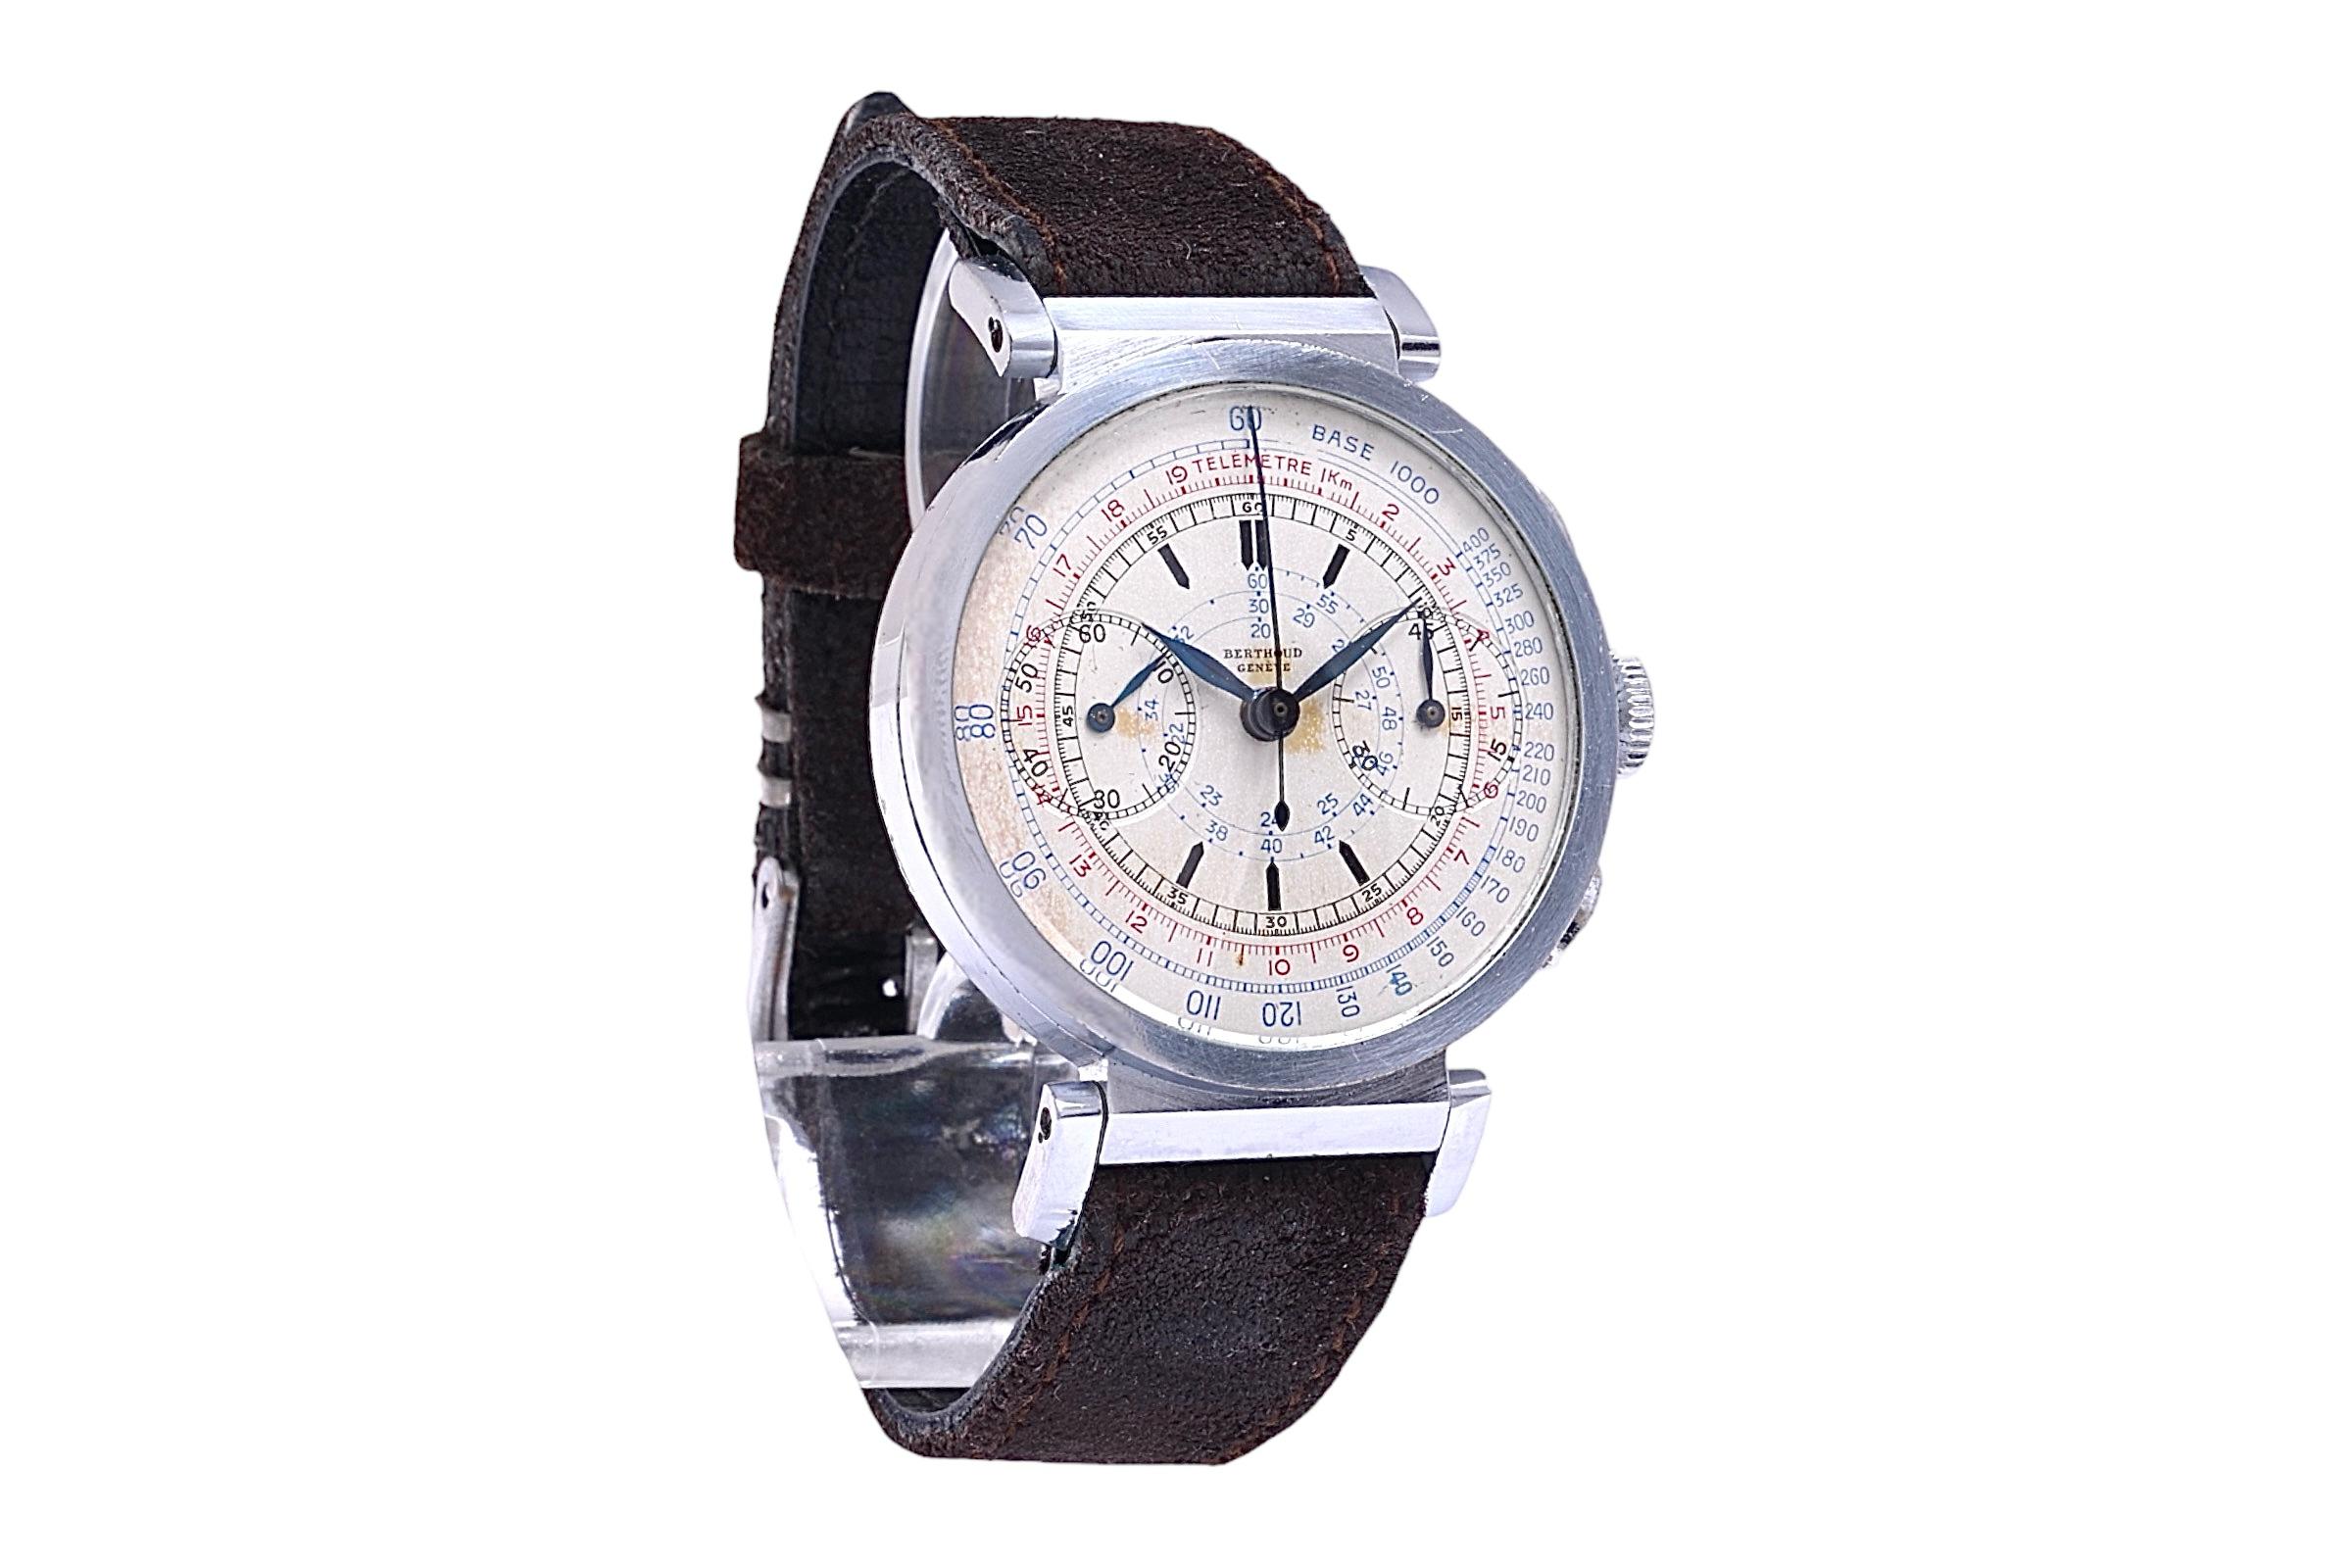 Berthoud / Universal Genève Uni Compax Chronograph Wrist Watch, Rare Collectors In Excellent Condition For Sale In Antwerp, BE